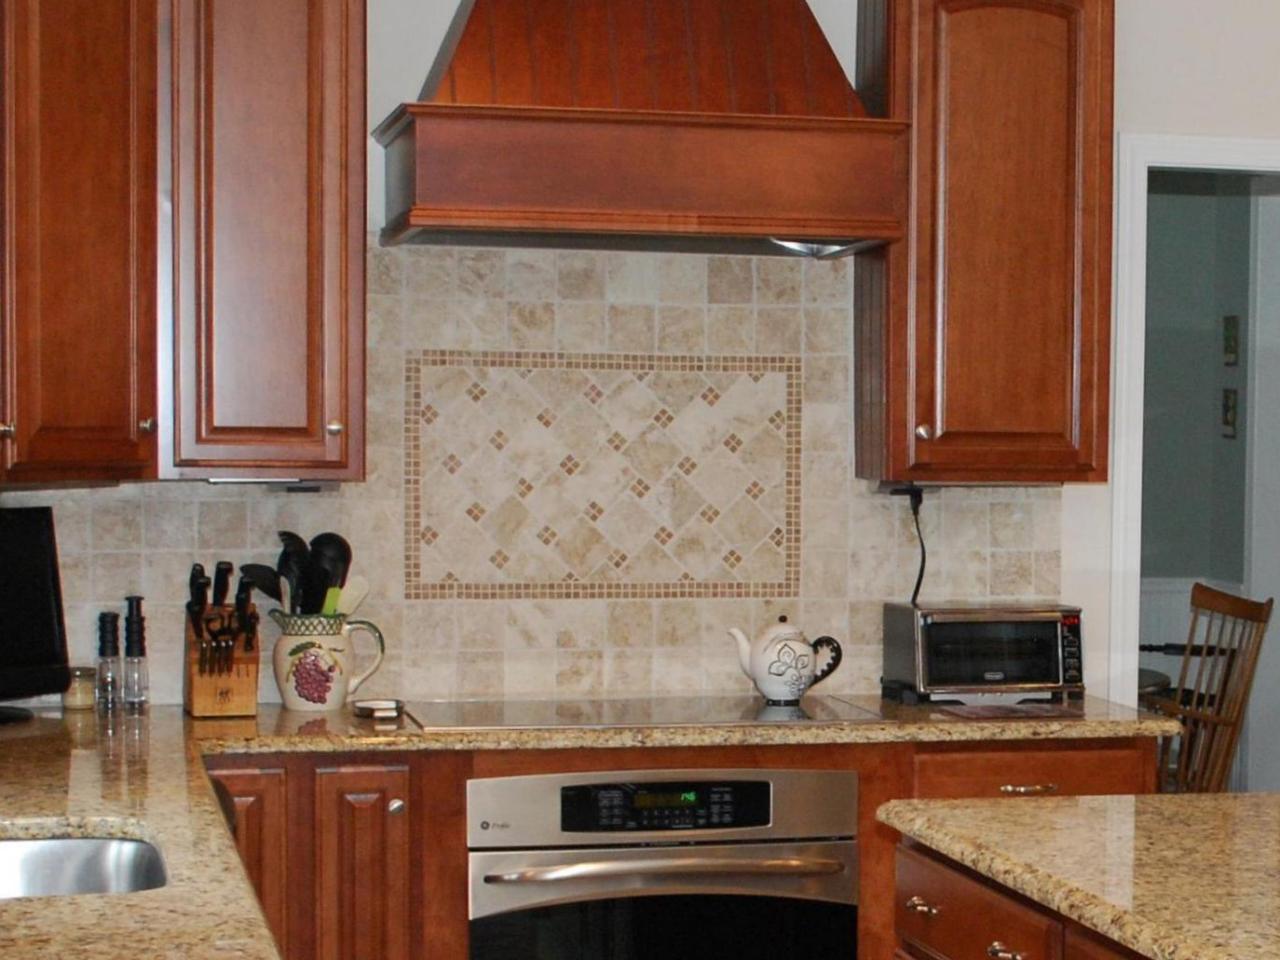 Remodel an ordinary kitchen cabinet